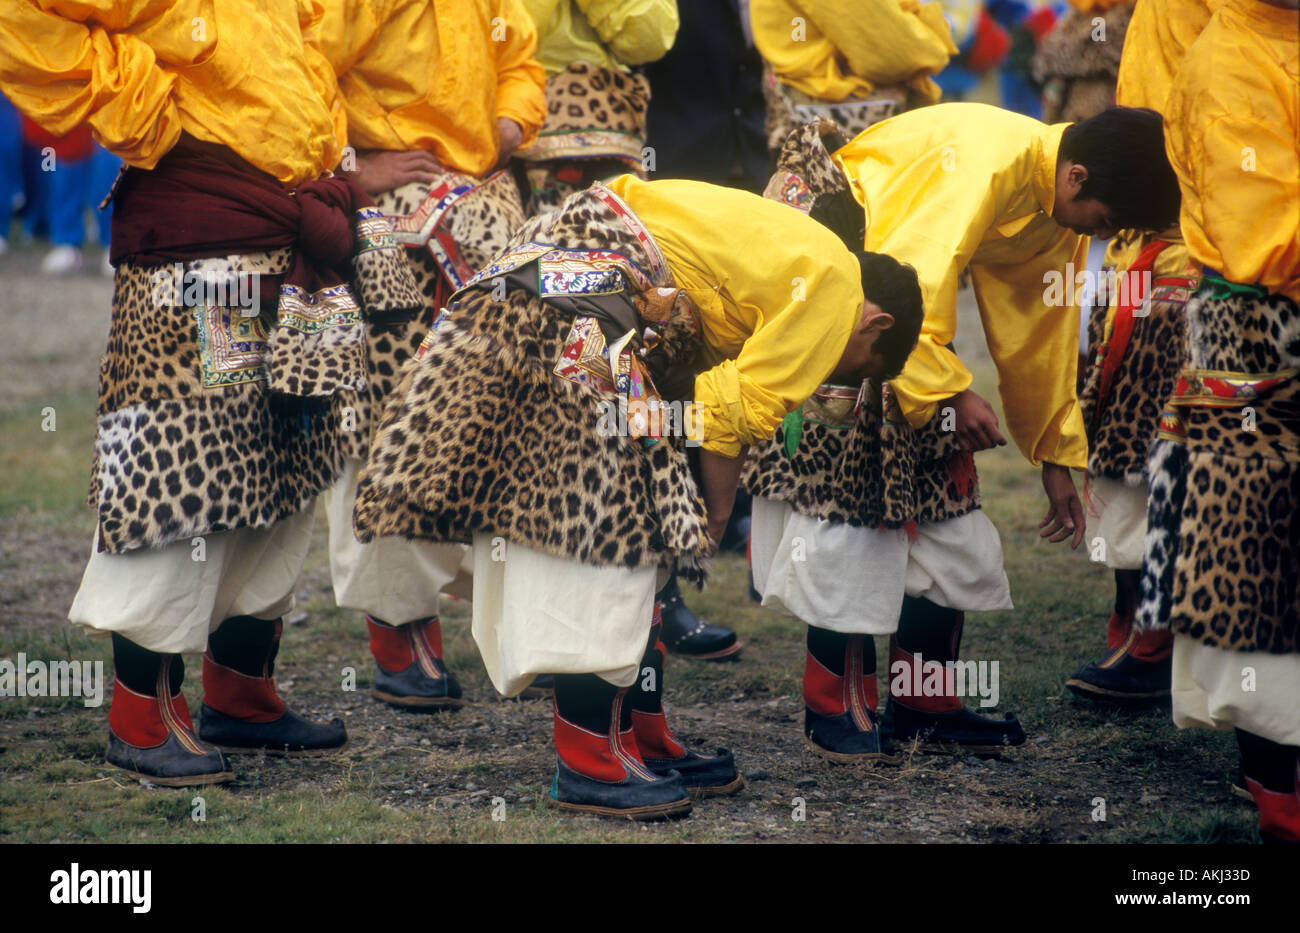 Dance troop with leopard skin costumes represent a region of Kham Litang Horse Festival Sichuan Province China Stock Photo